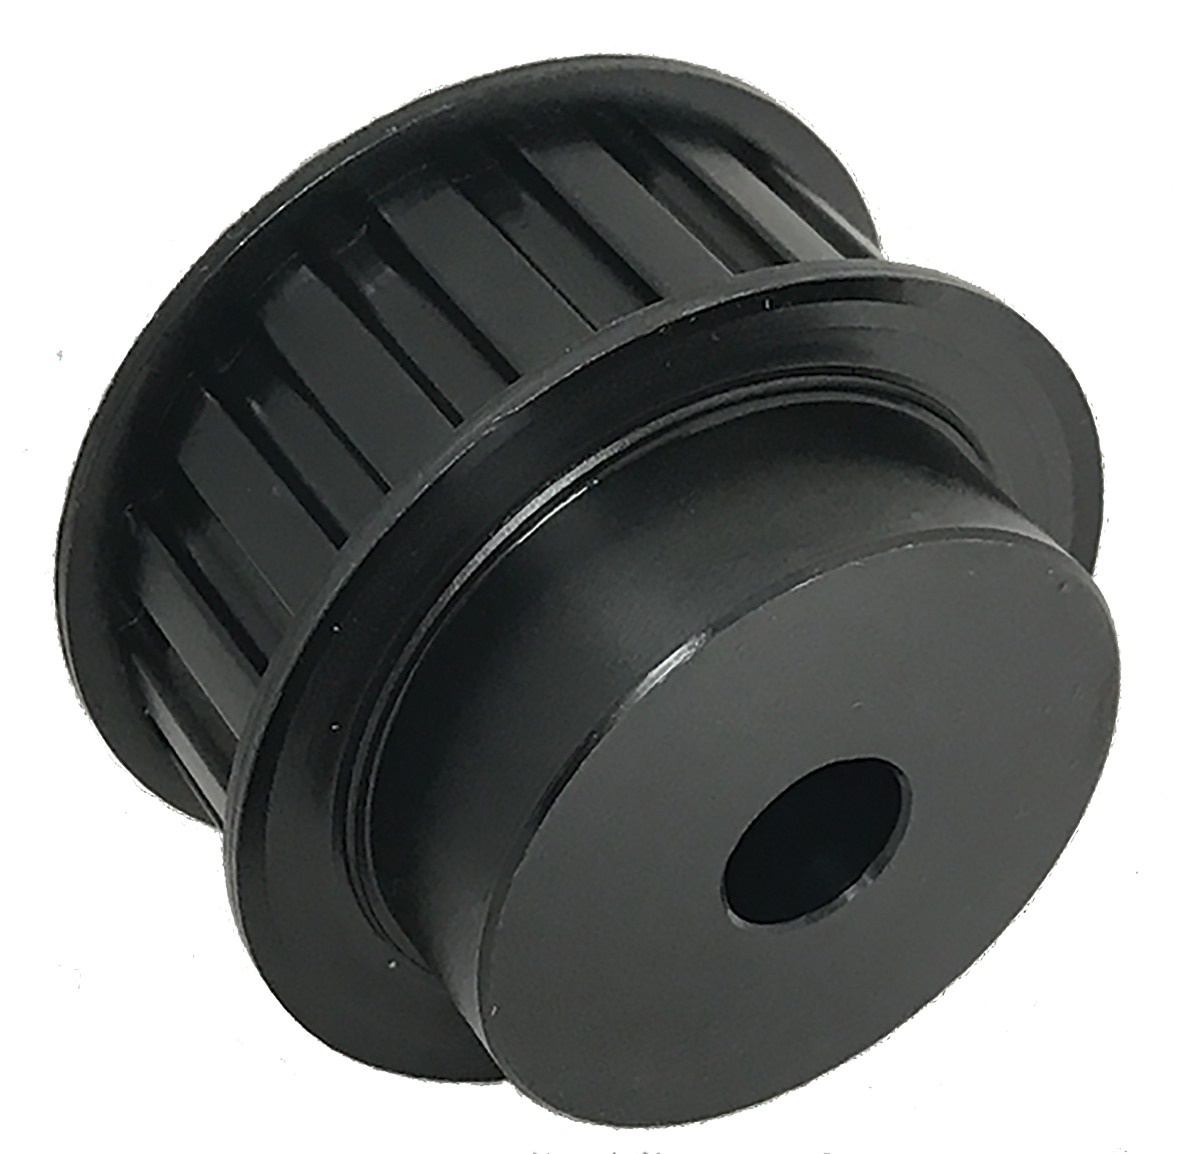 21H200-6FS10 - Steel Imperial Pitch Pulleys